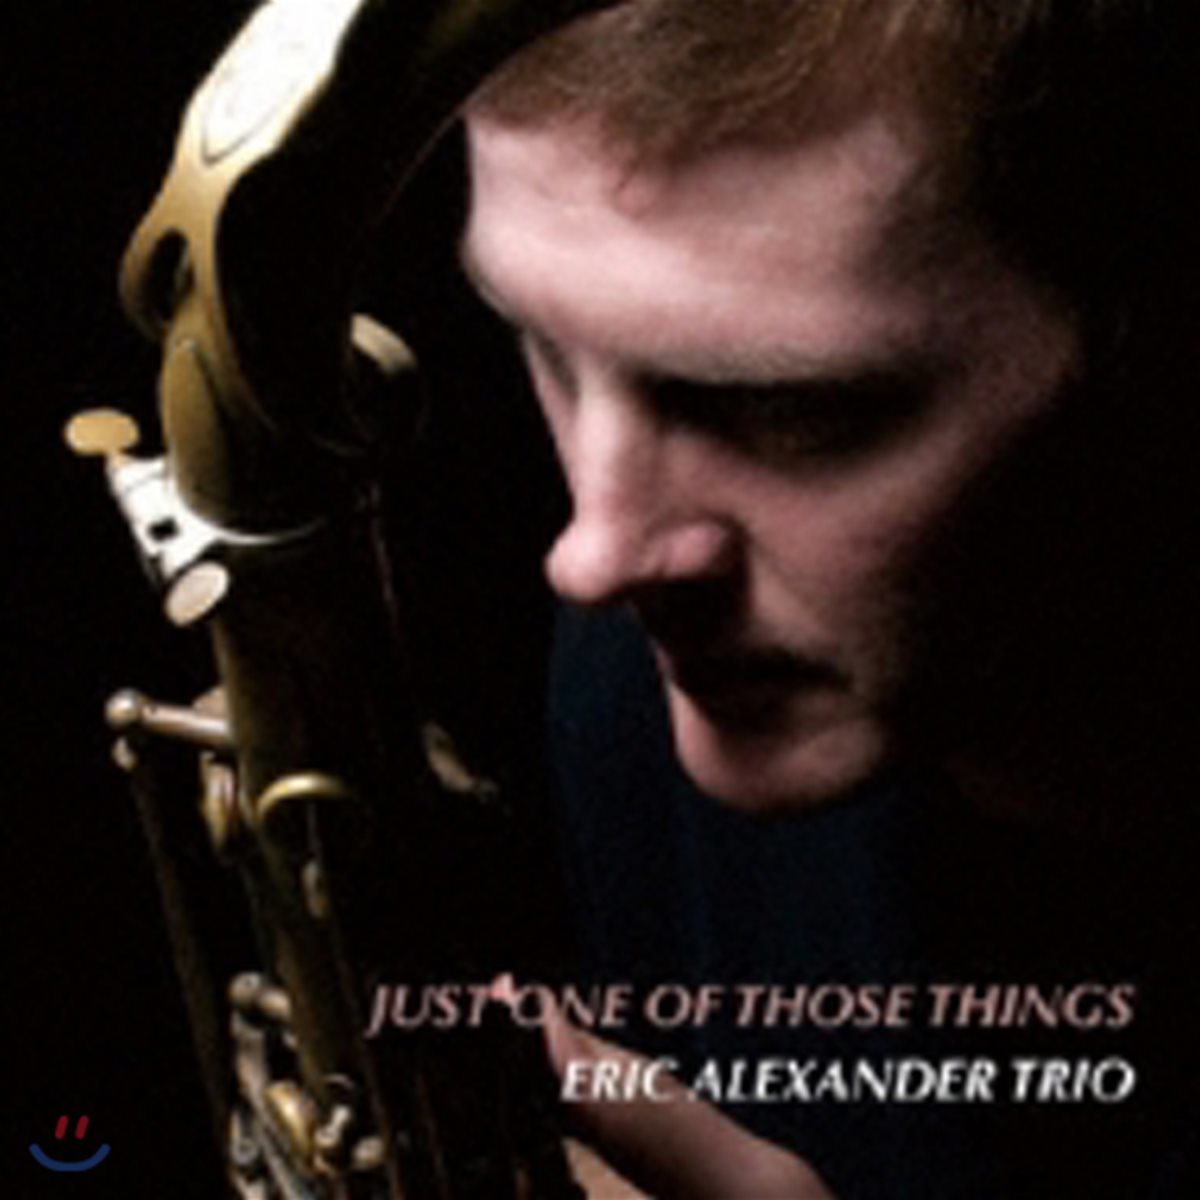 Eric Alexander Trio (에릭 알렌산더 트리오) - Just One of Those Things [LP]